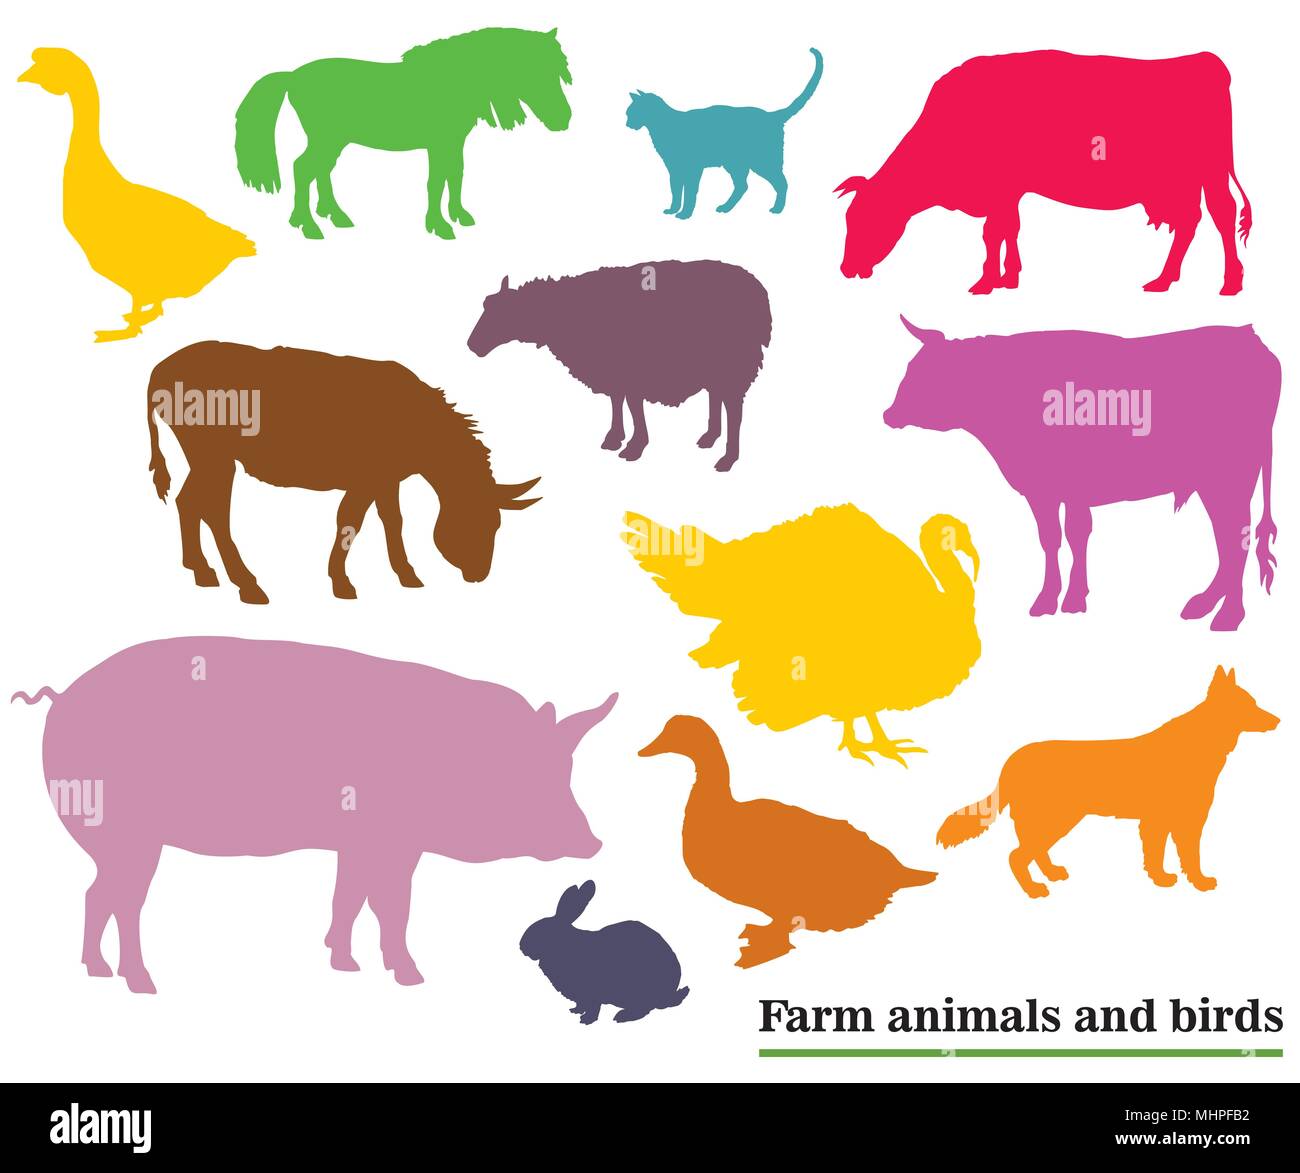 Set of colorful vector farm animals and birds ( Dog, Cat, Cow, Turkey, Donkey, Pig, Rabbit, Goose,  Sheep, Duck, Bull) silhouettes in black color isol Stock Vector